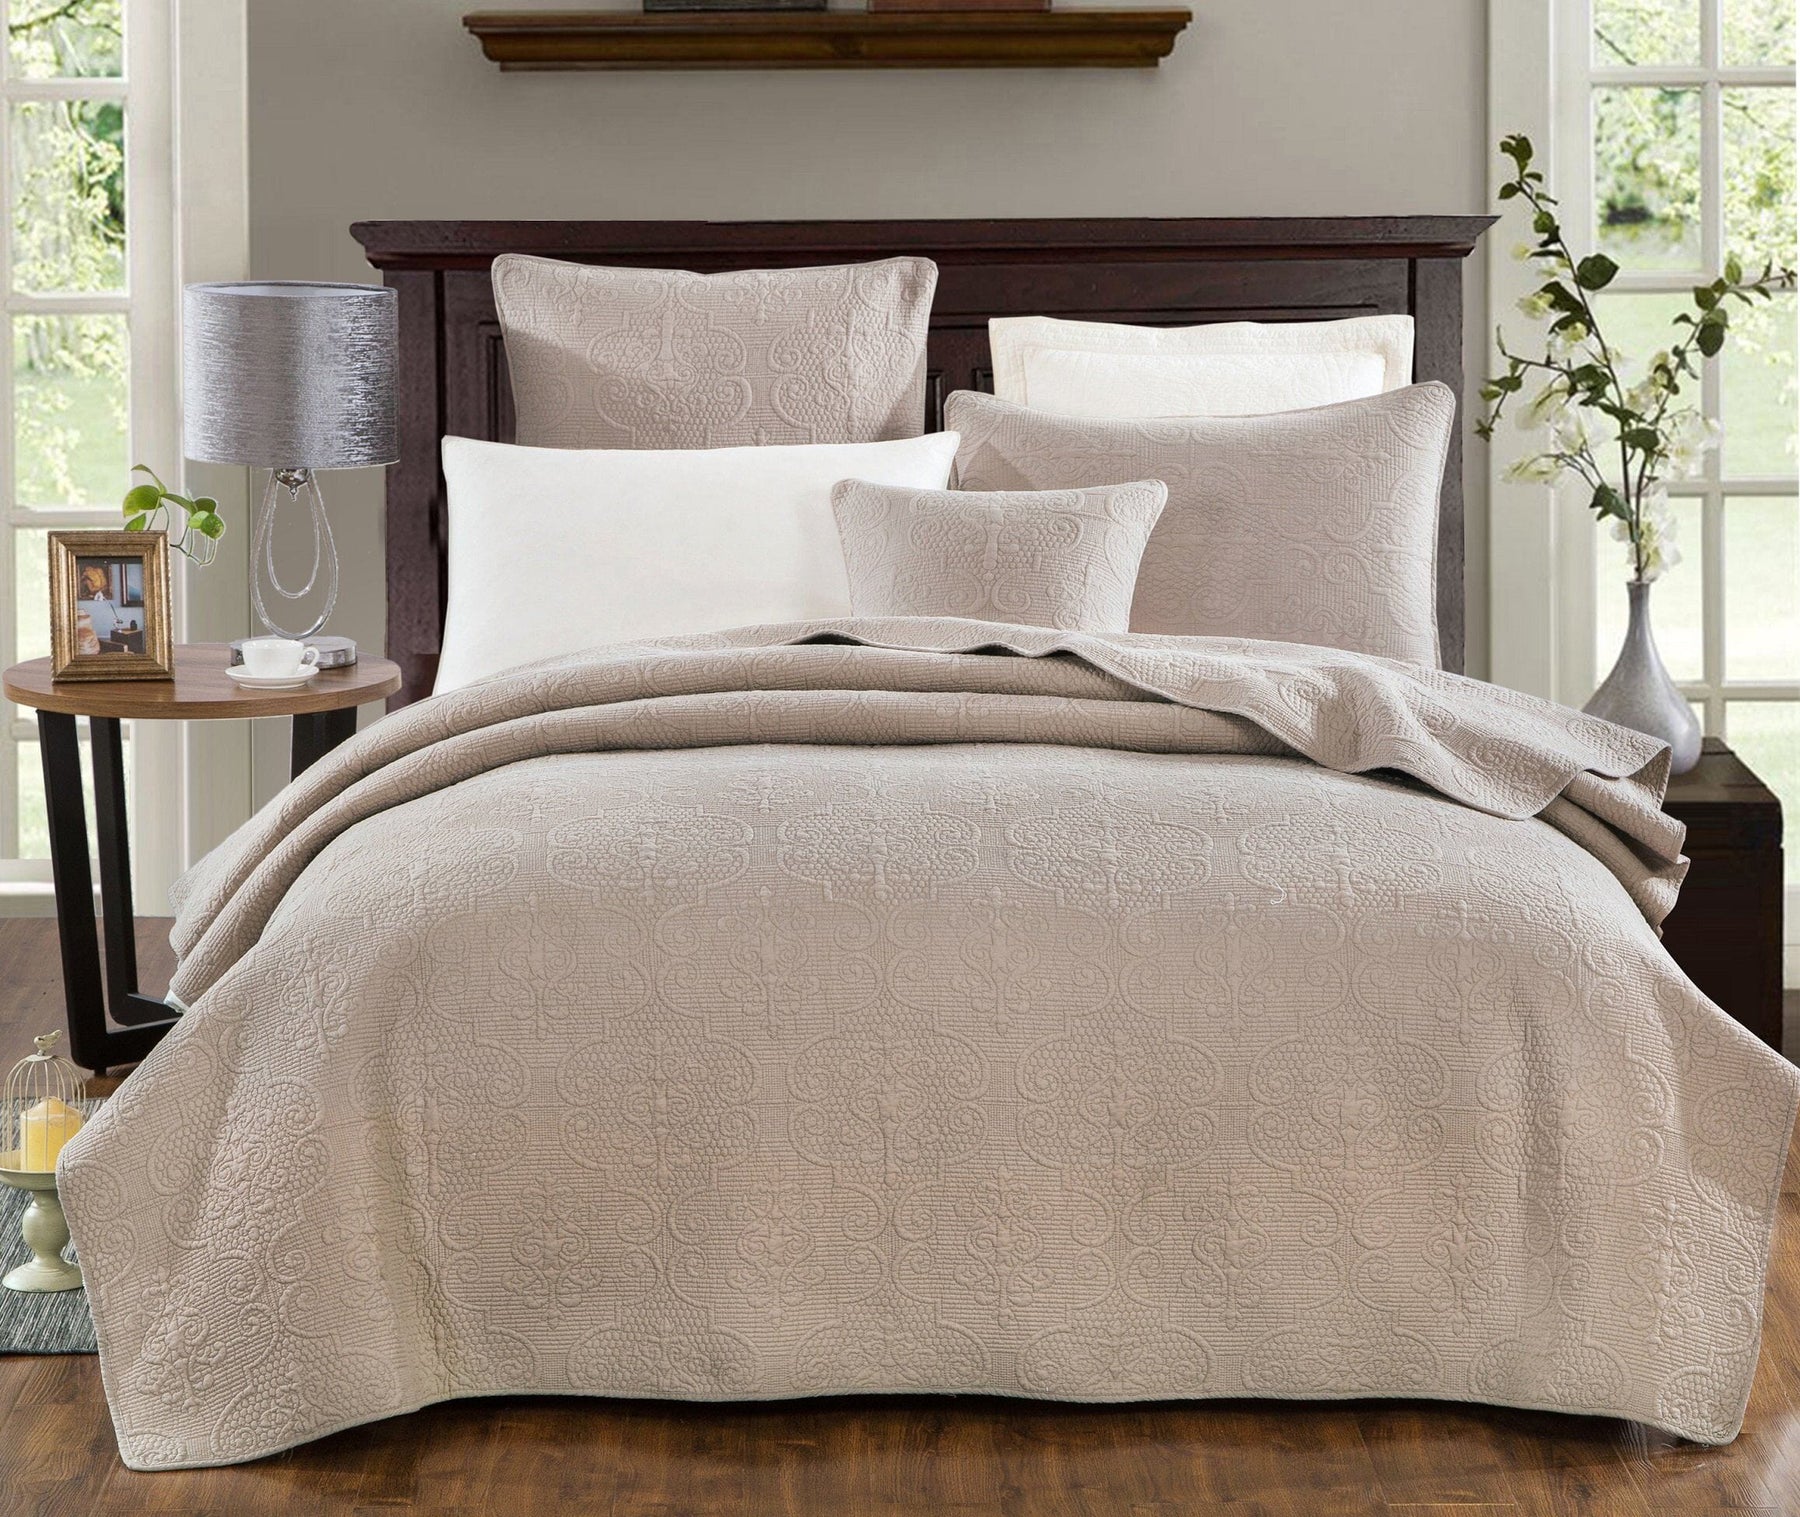 Matelasse Bedding: Frequently Asked Questions